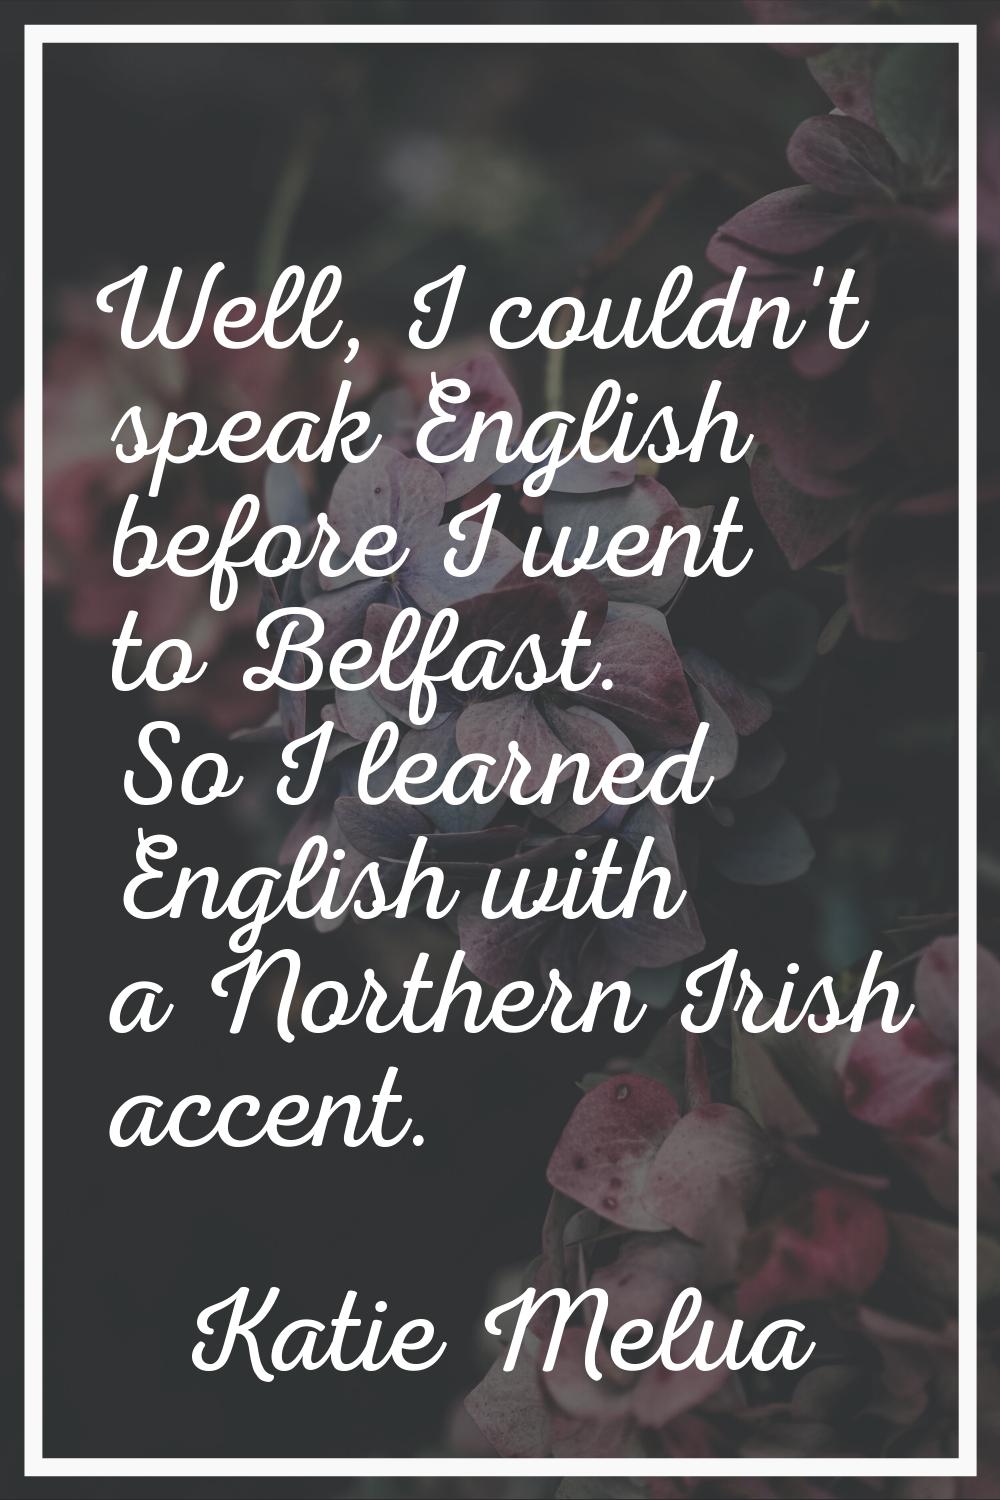 Well, I couldn't speak English before I went to Belfast. So I learned English with a Northern Irish